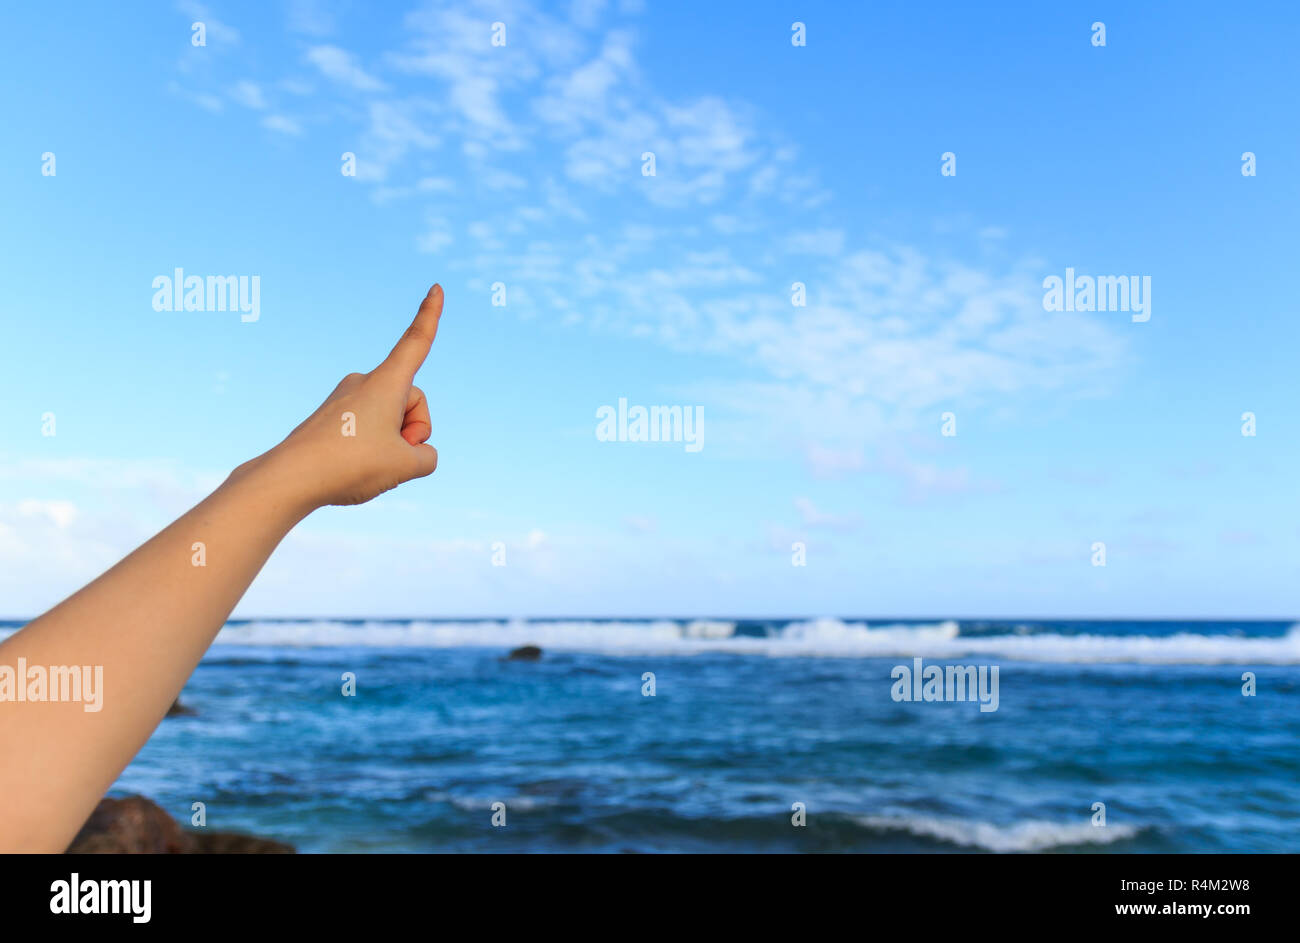 Hand against a blue sky background Stock Photo